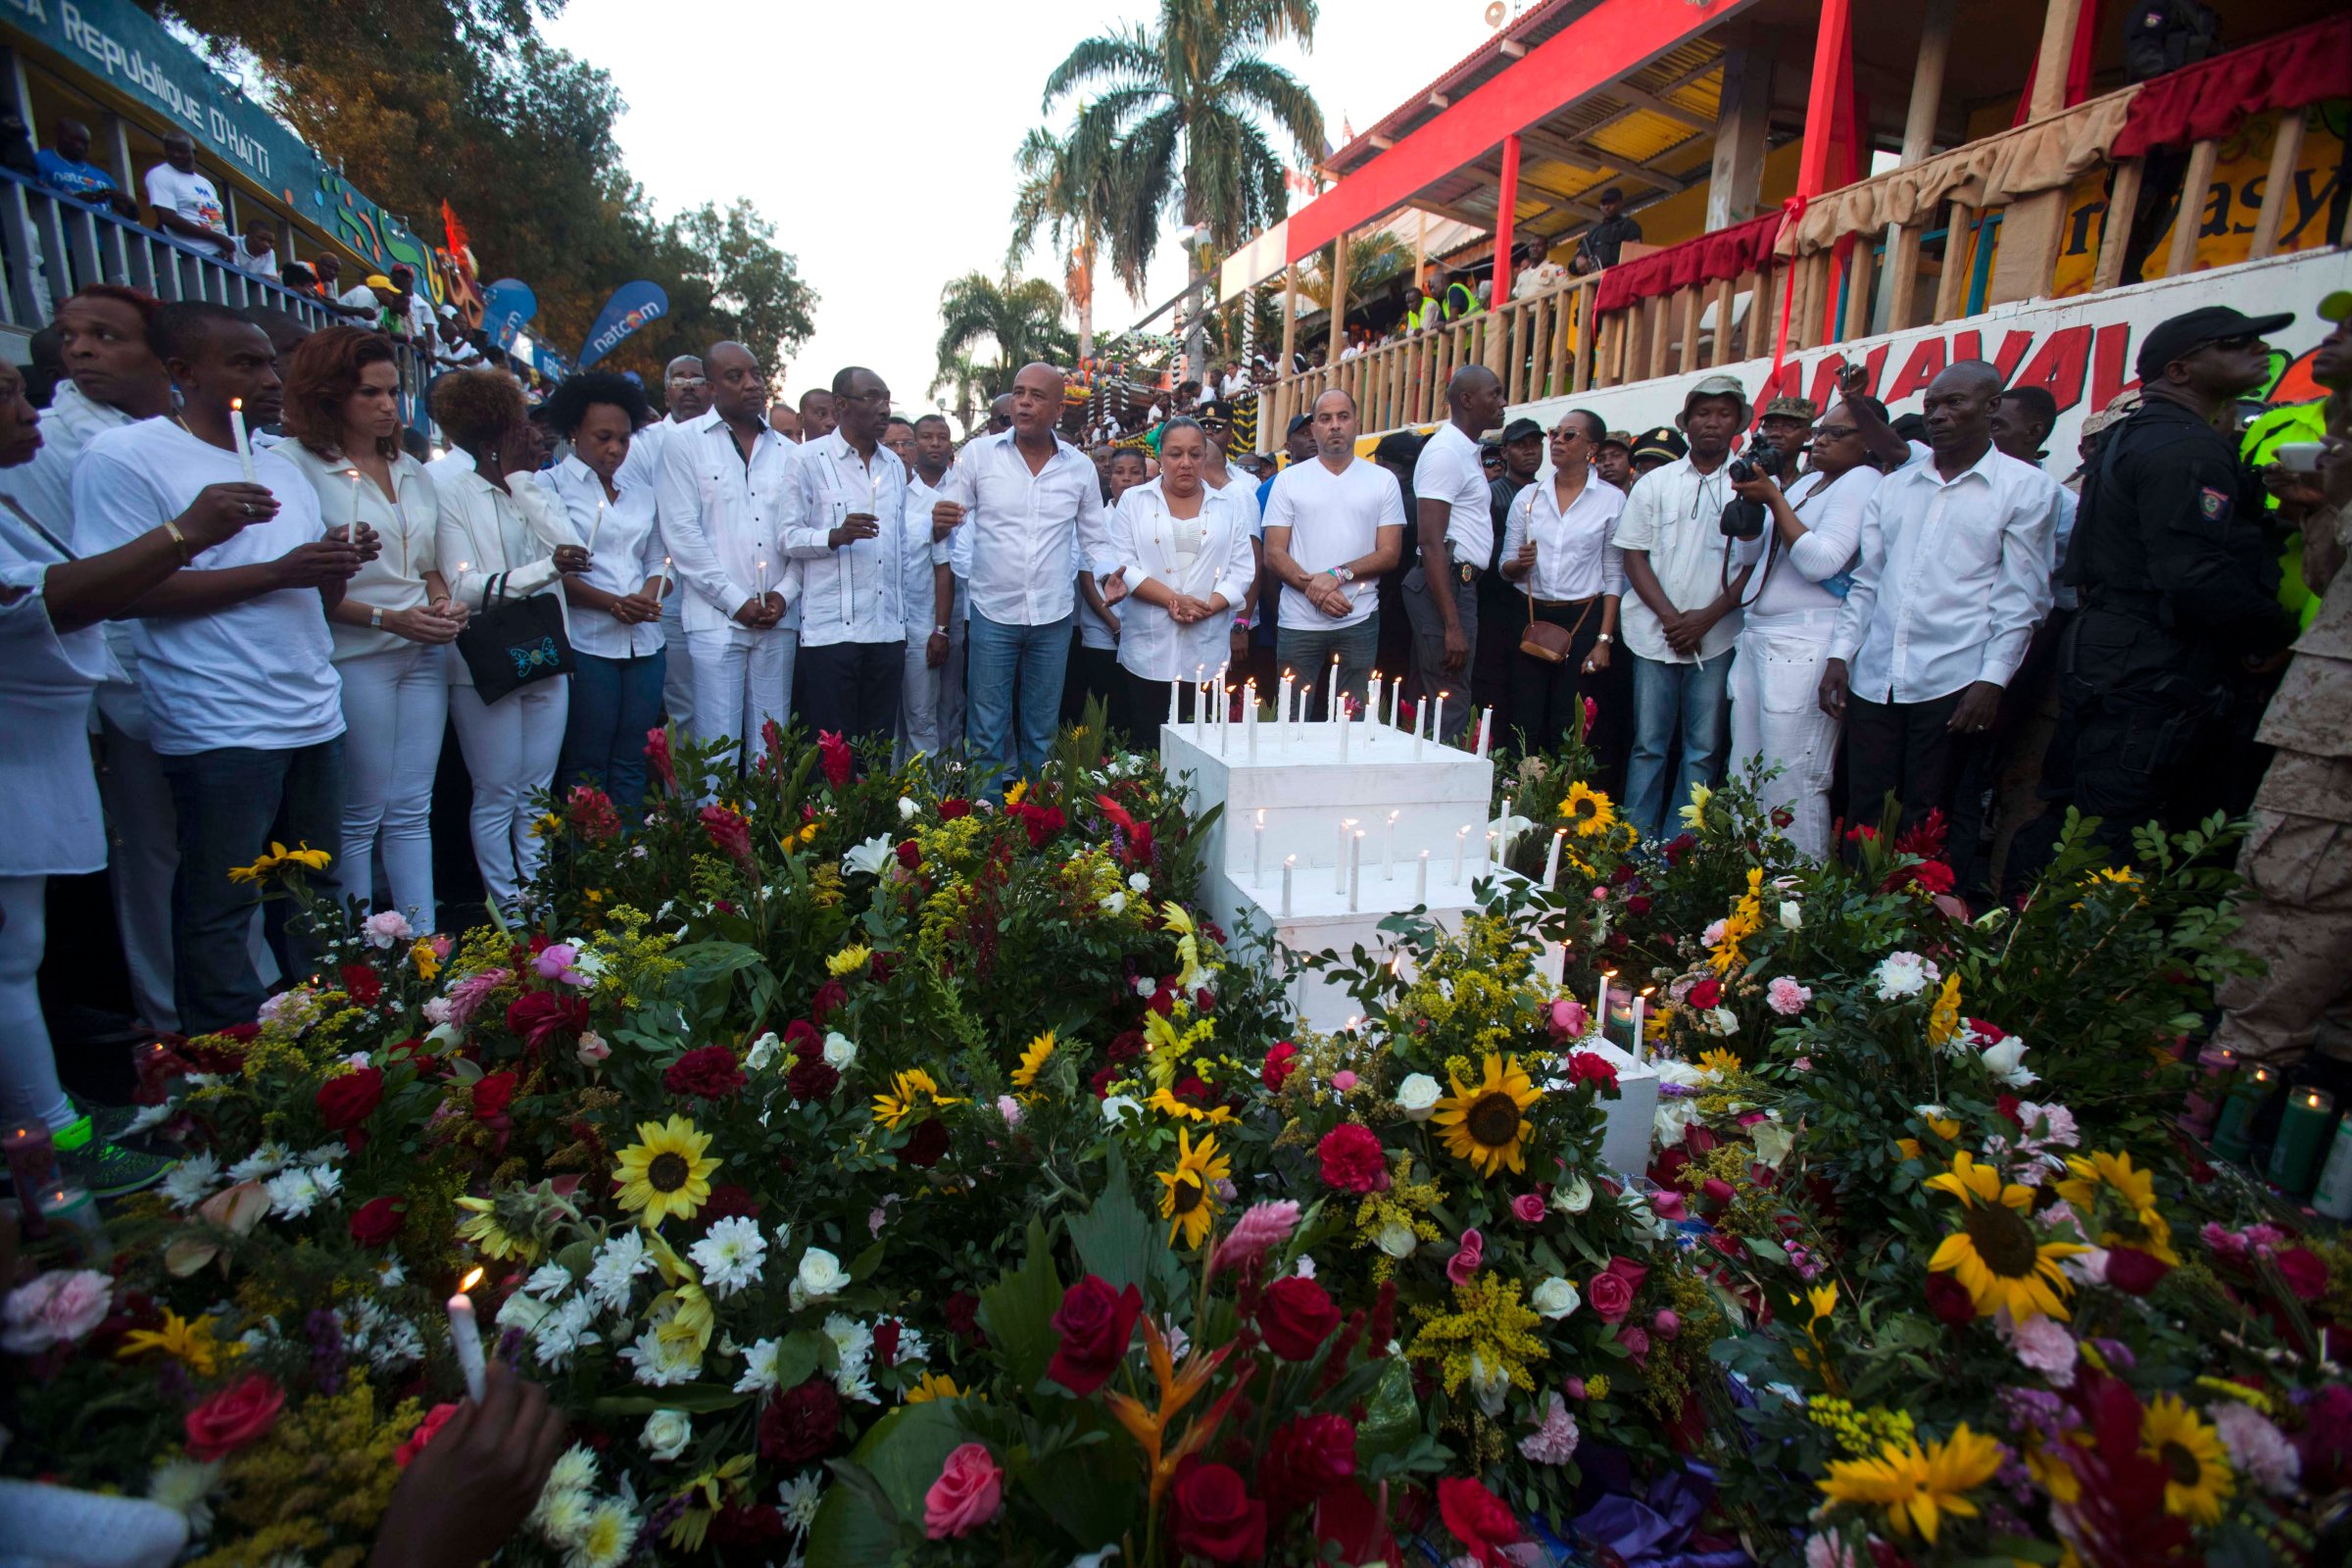 Haiti's President Michel Martelly, center left, and first lady Sophia Martelly, right center, stand at a memorial in Port-au-Prince, Haiti, Feb. 17, 2015